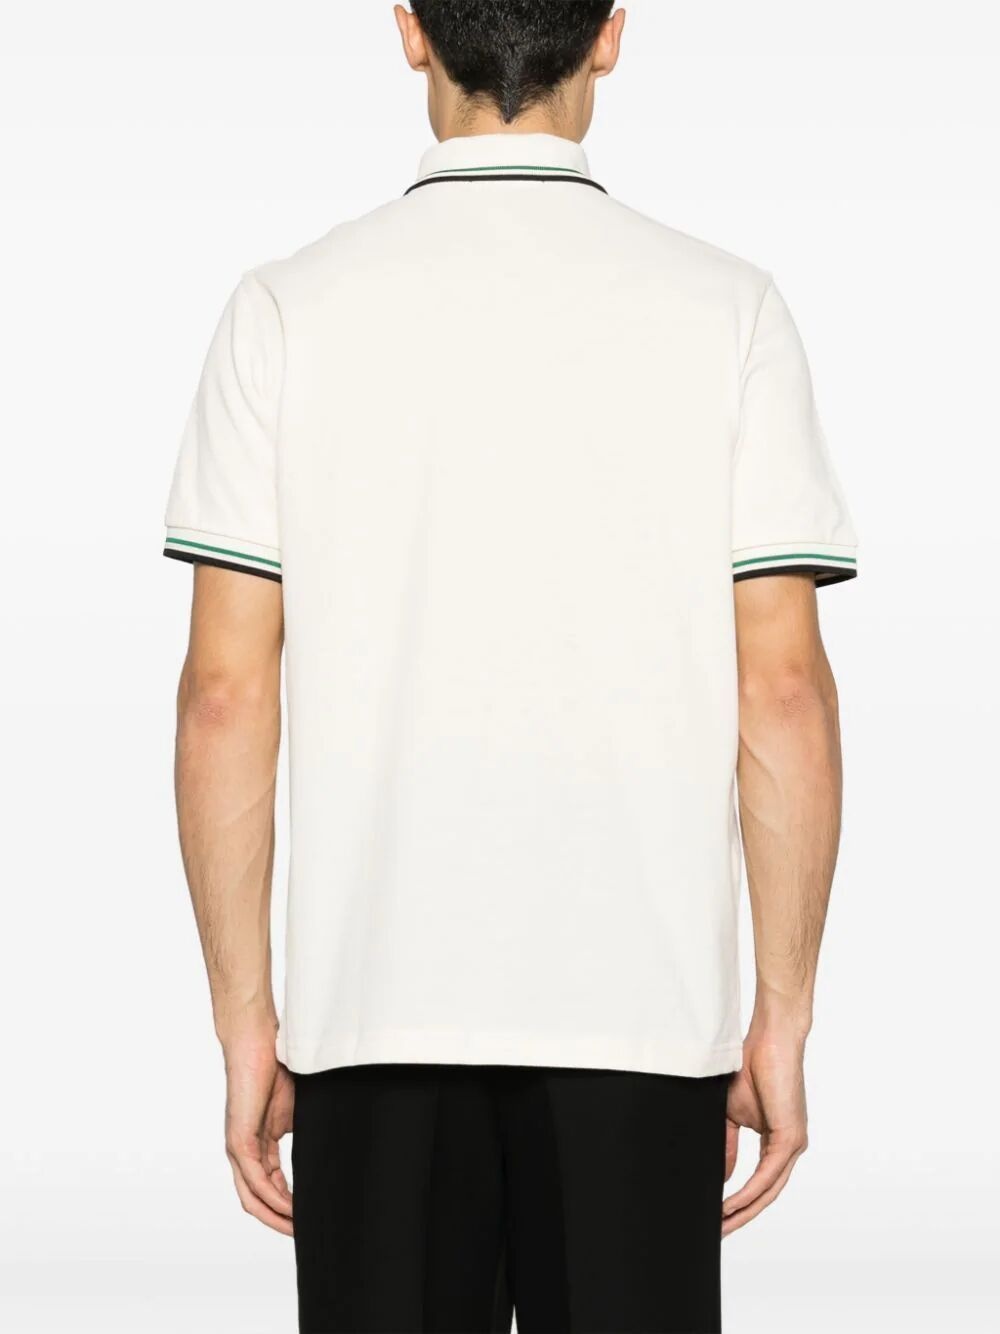 FP TWIN TIPPED FRED PERRY SHIRT - 4